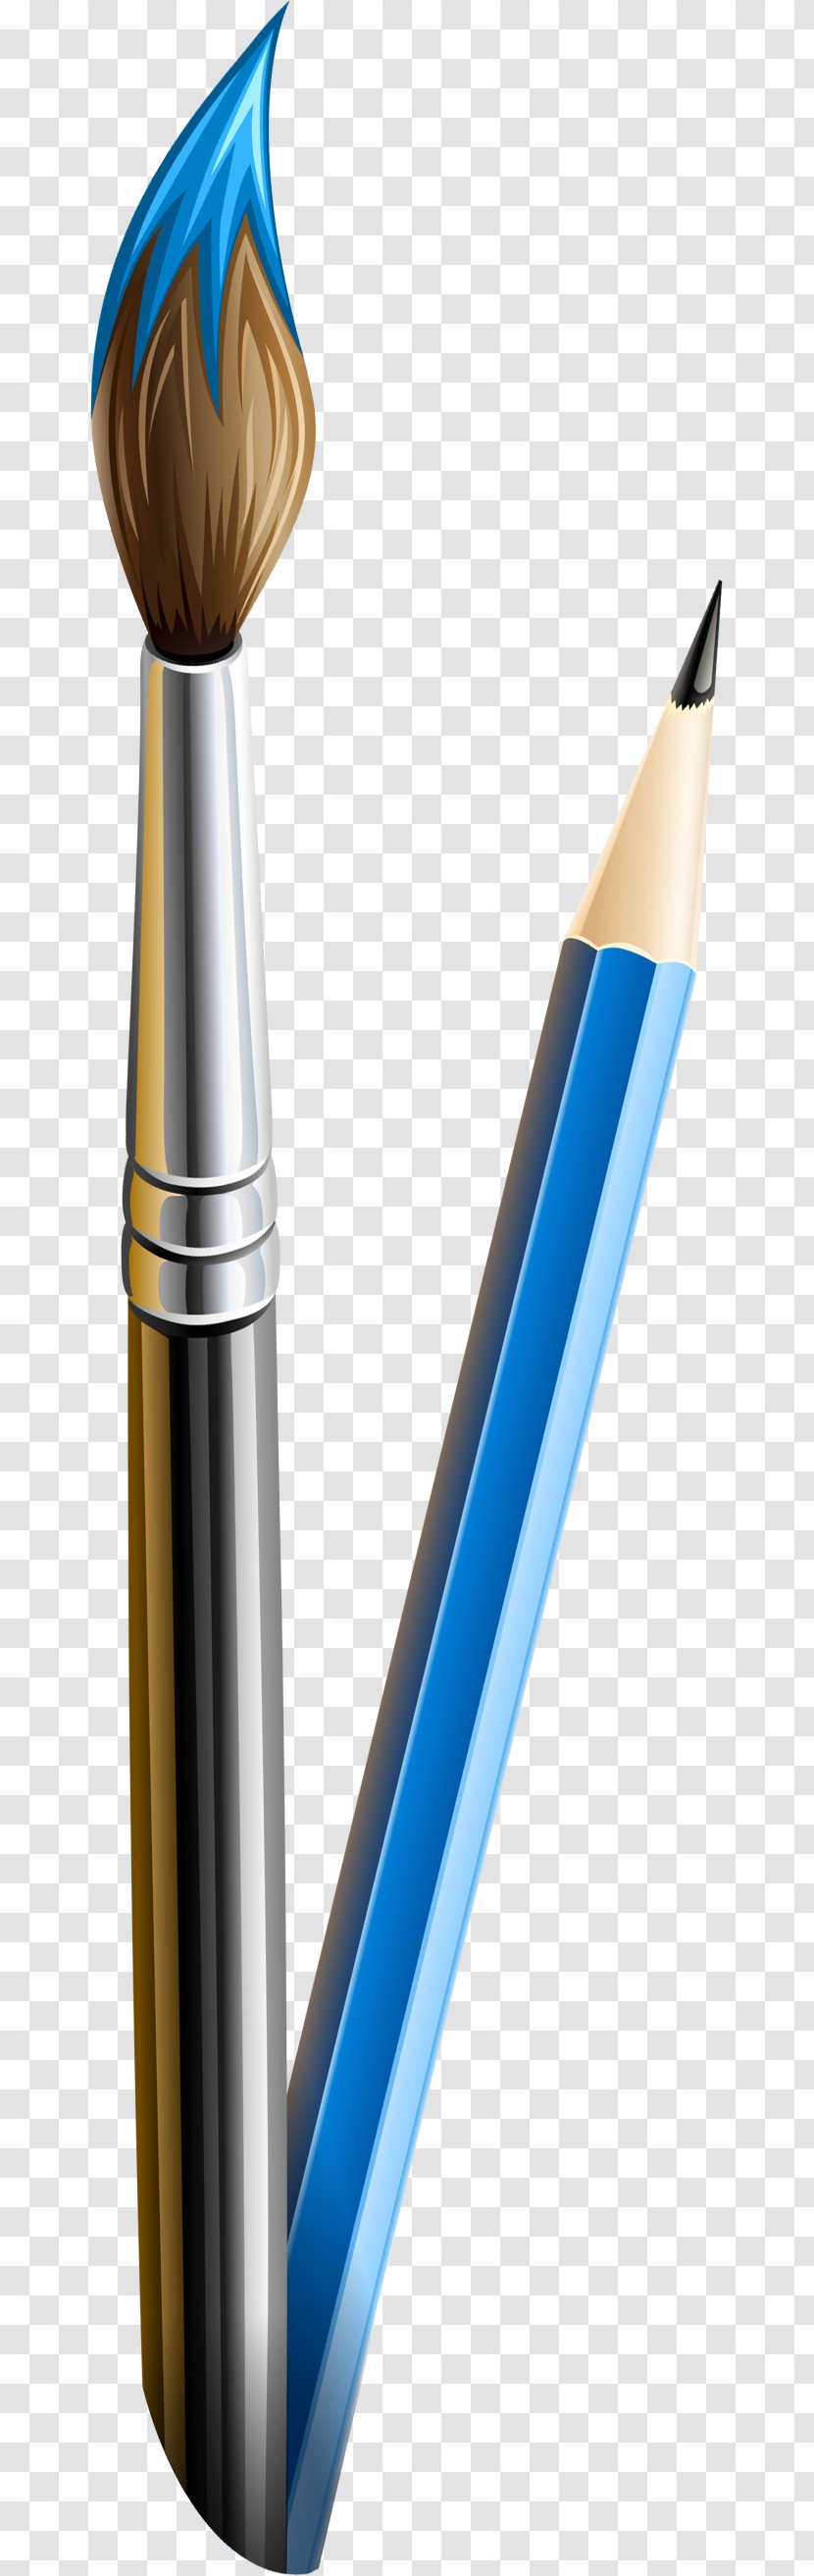 Pencil Office Supplies Paintbrush - Colored - Brushes Transparent PNG